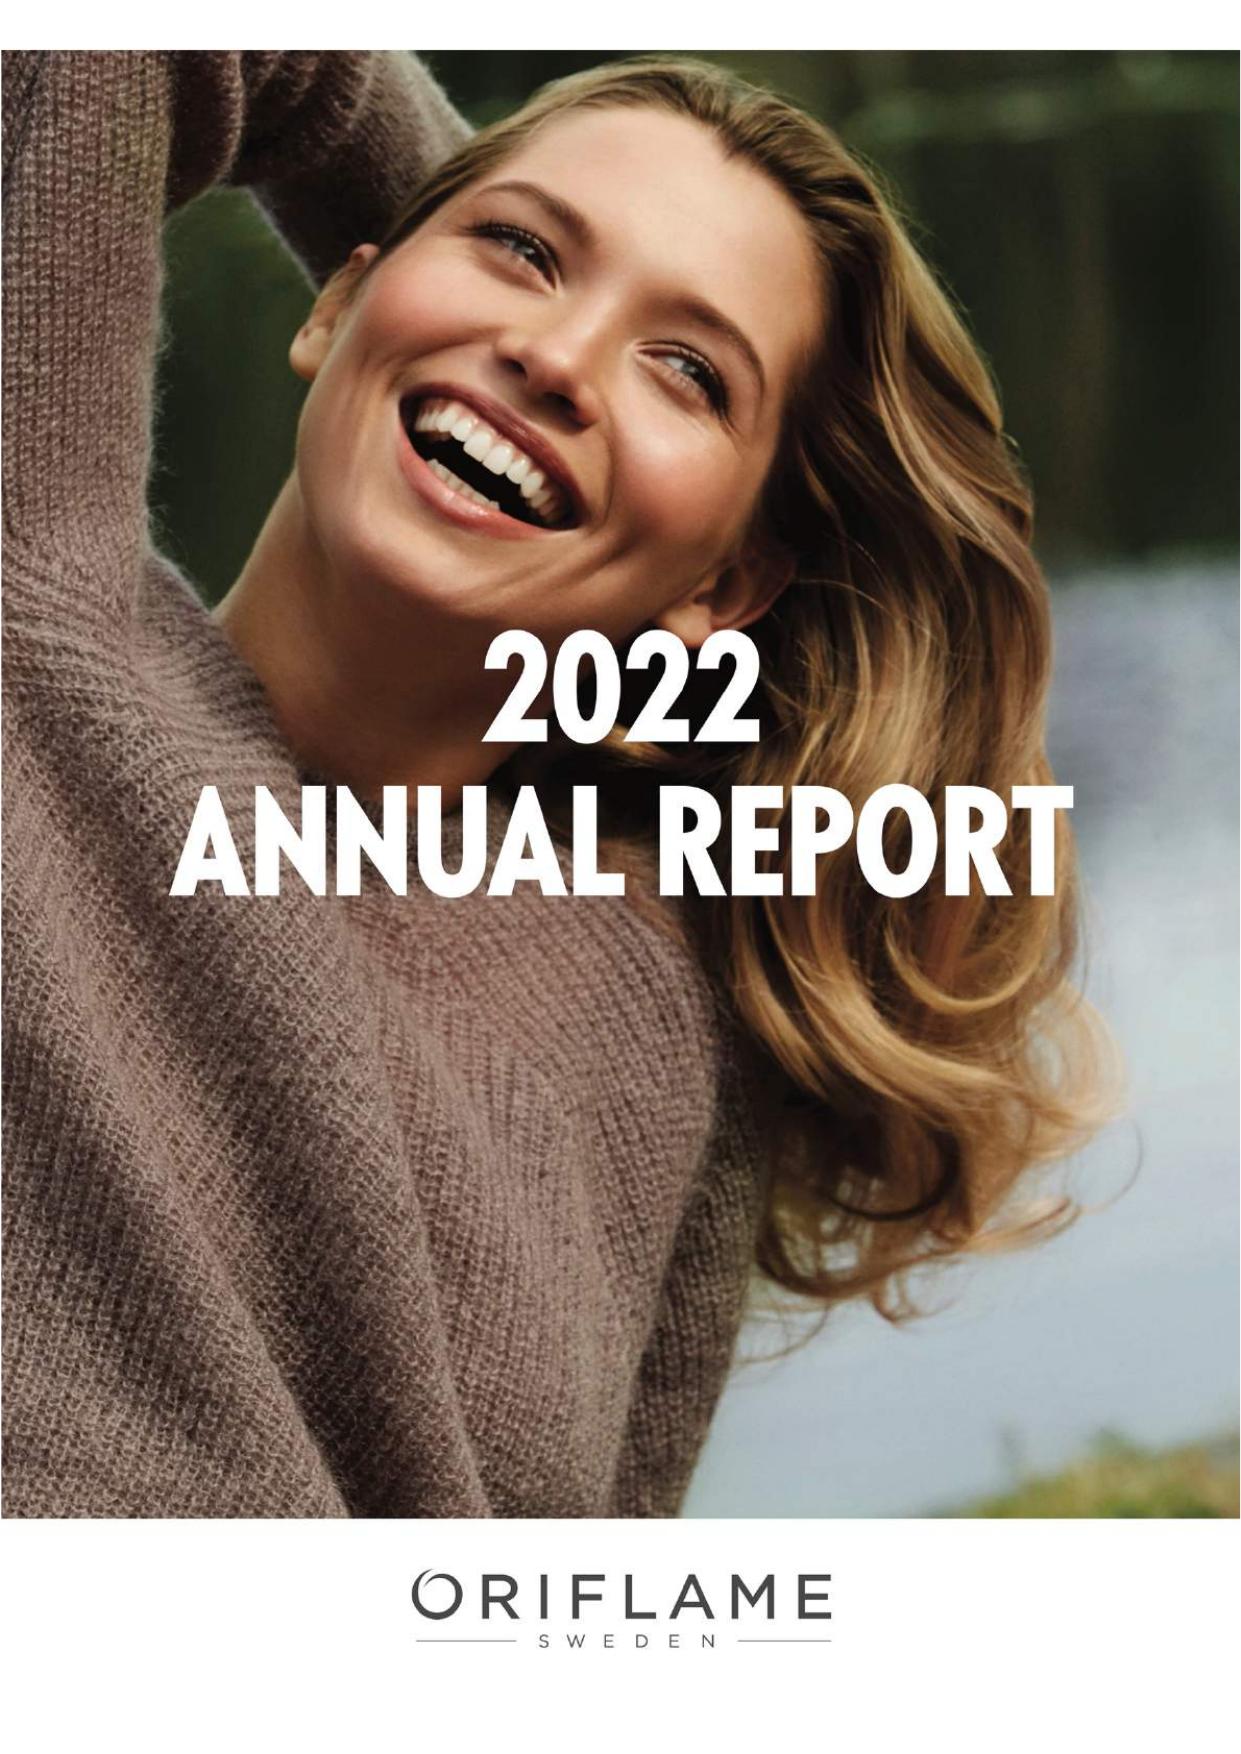 SCOPELY 2022 Annual Report